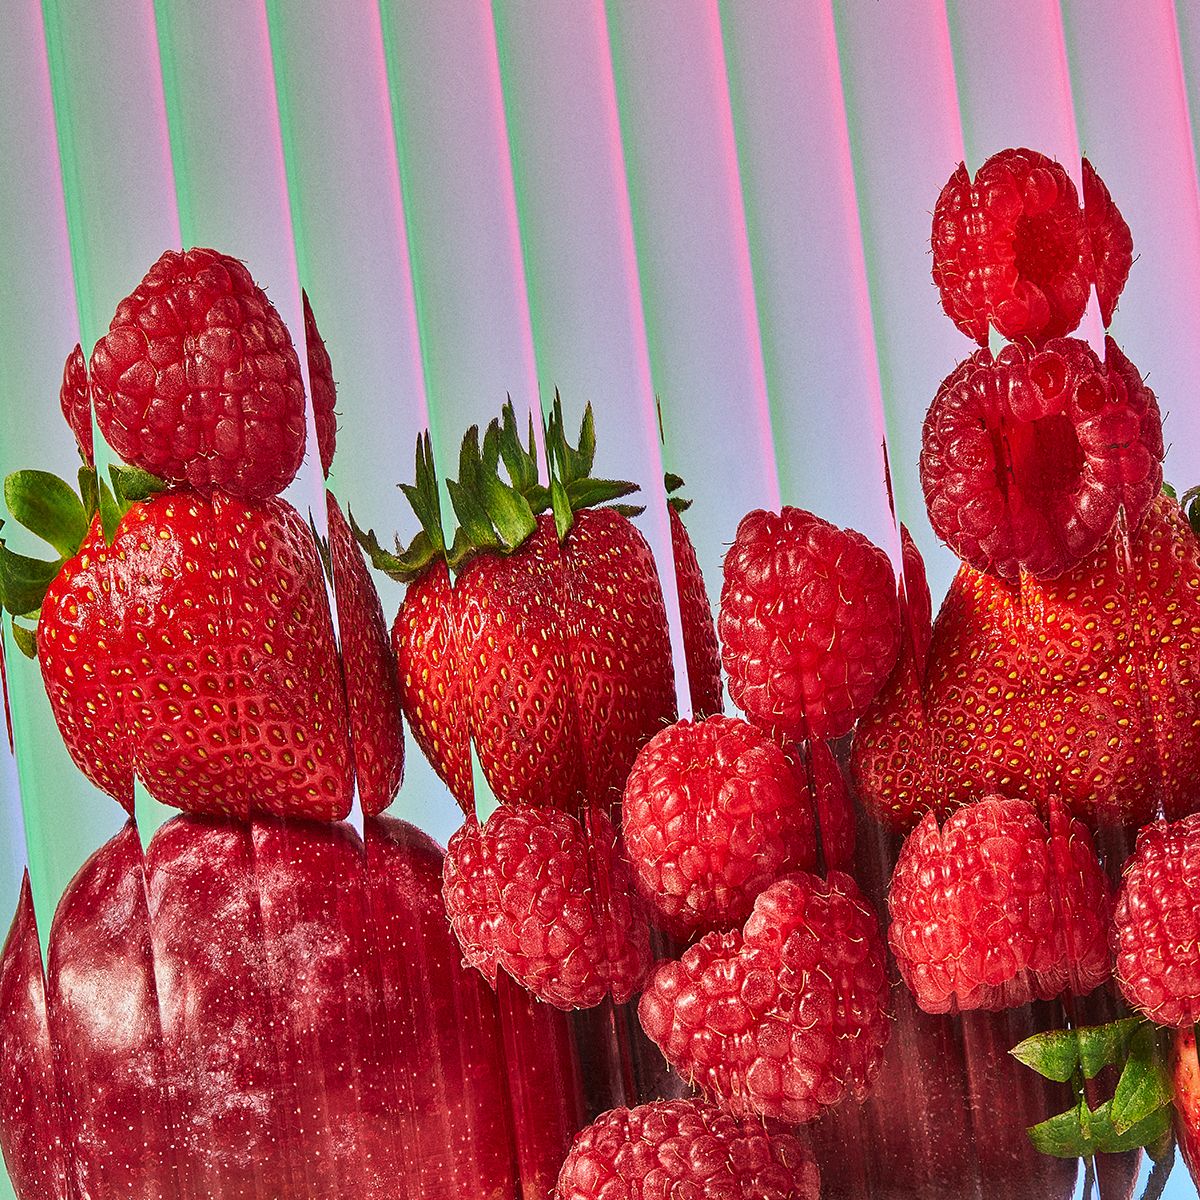 Red strawberries and raspberries stacked on top of each other photographed behind glass